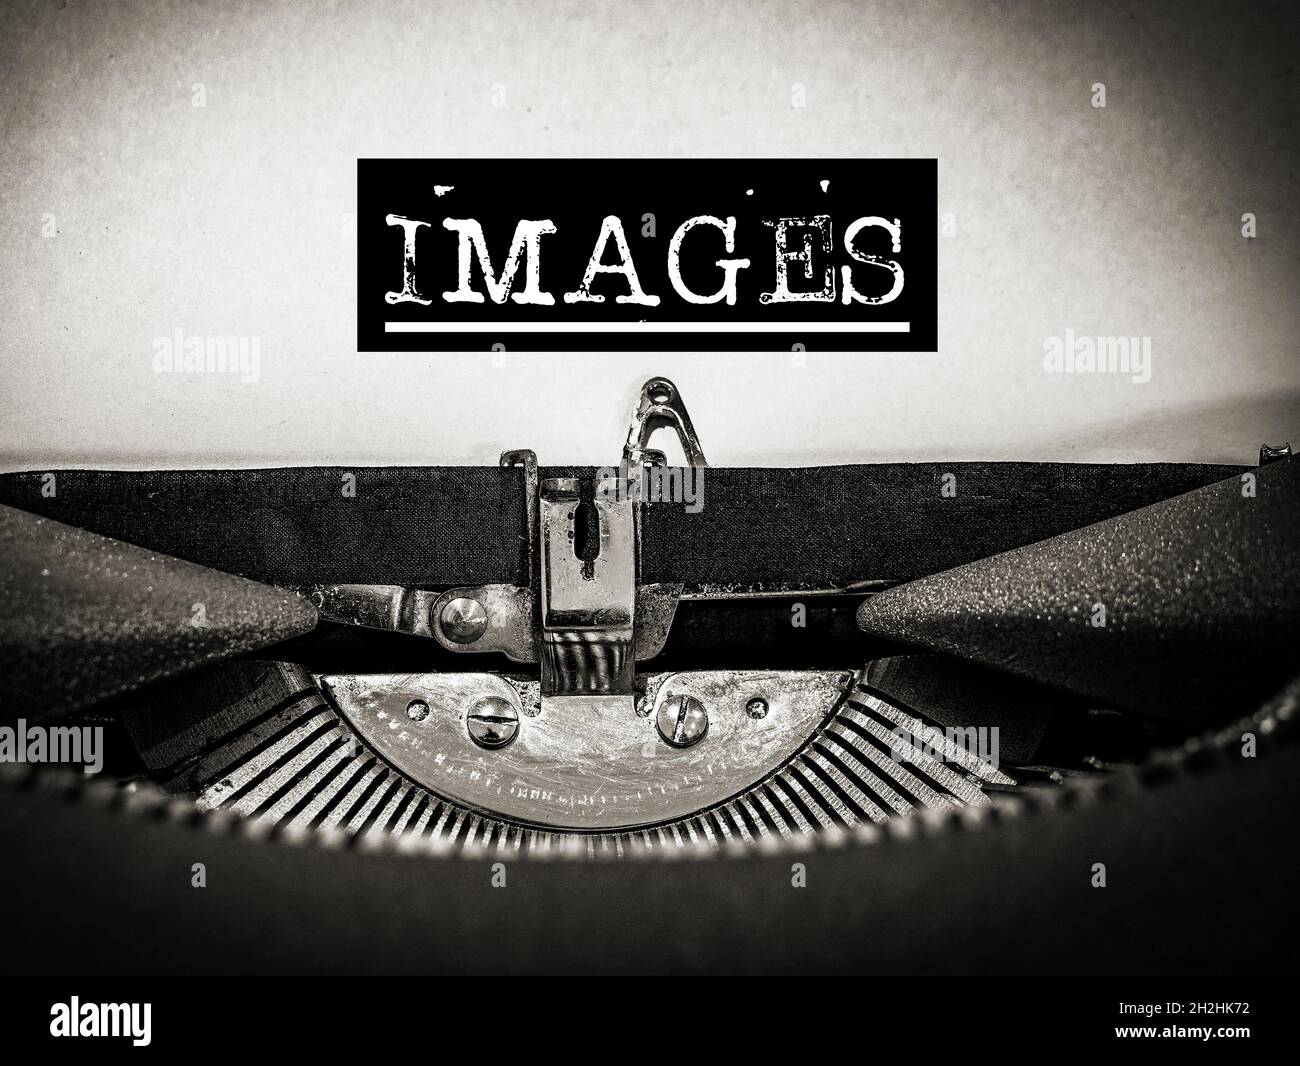 Images displayed on a vintage typewriter with underscore and black border around text in a sepia tone Stock Photo